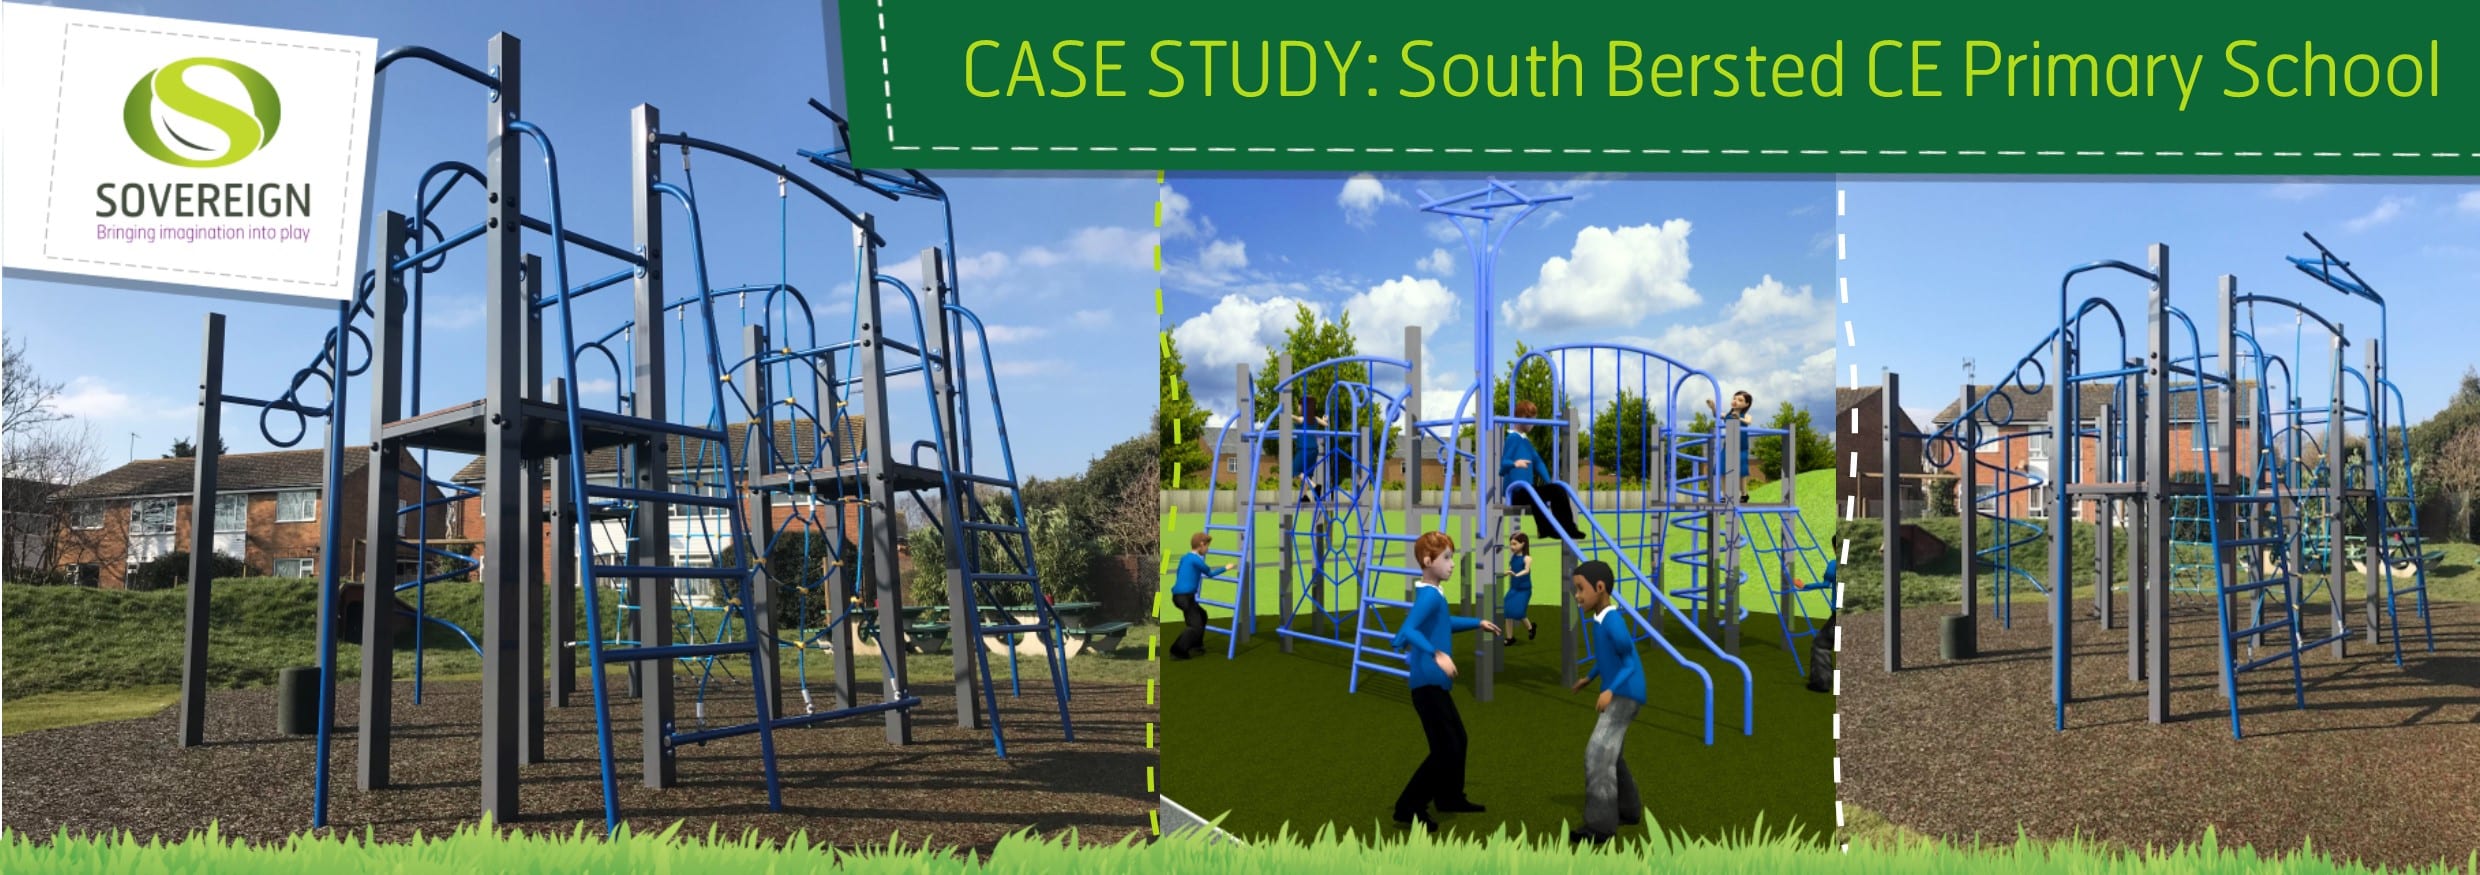 Case Study: South Bersted Ce Primary School